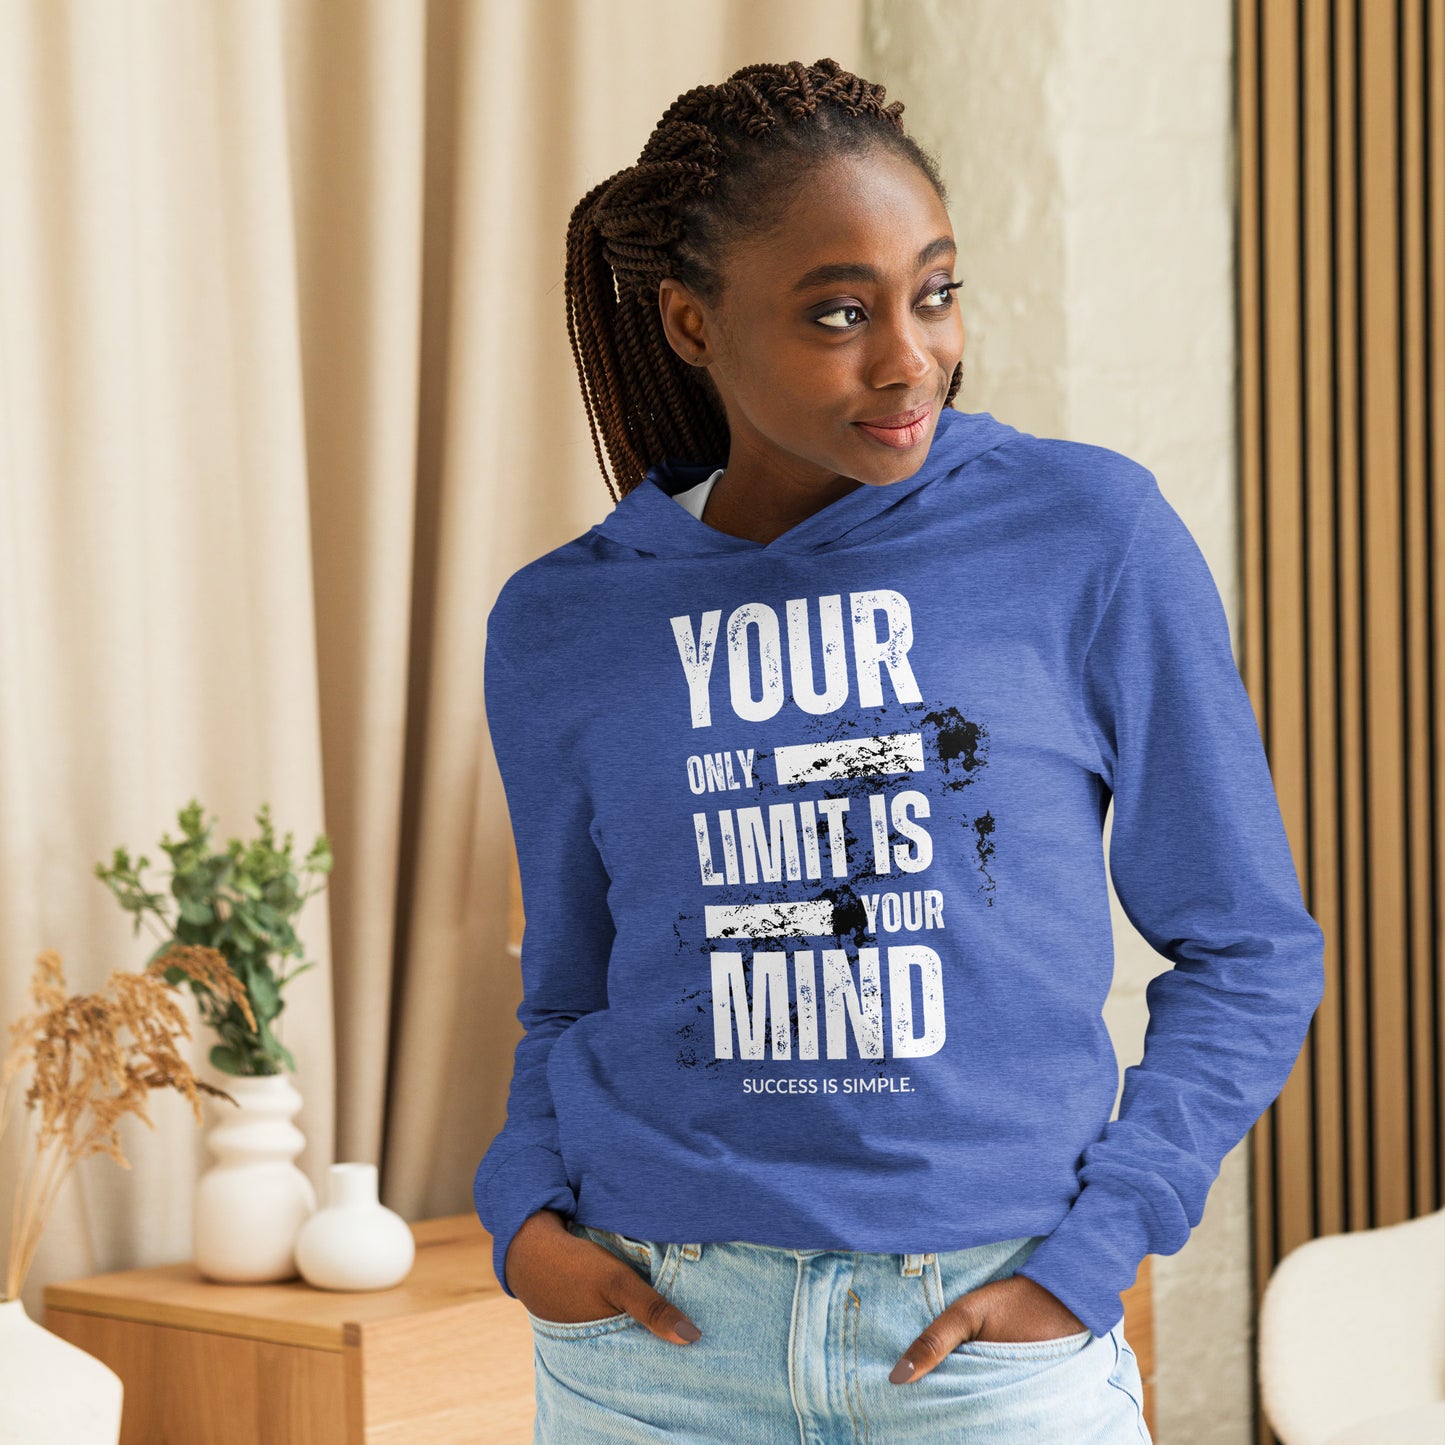 Your only limit is your mind - Hooded long-sleeve tee